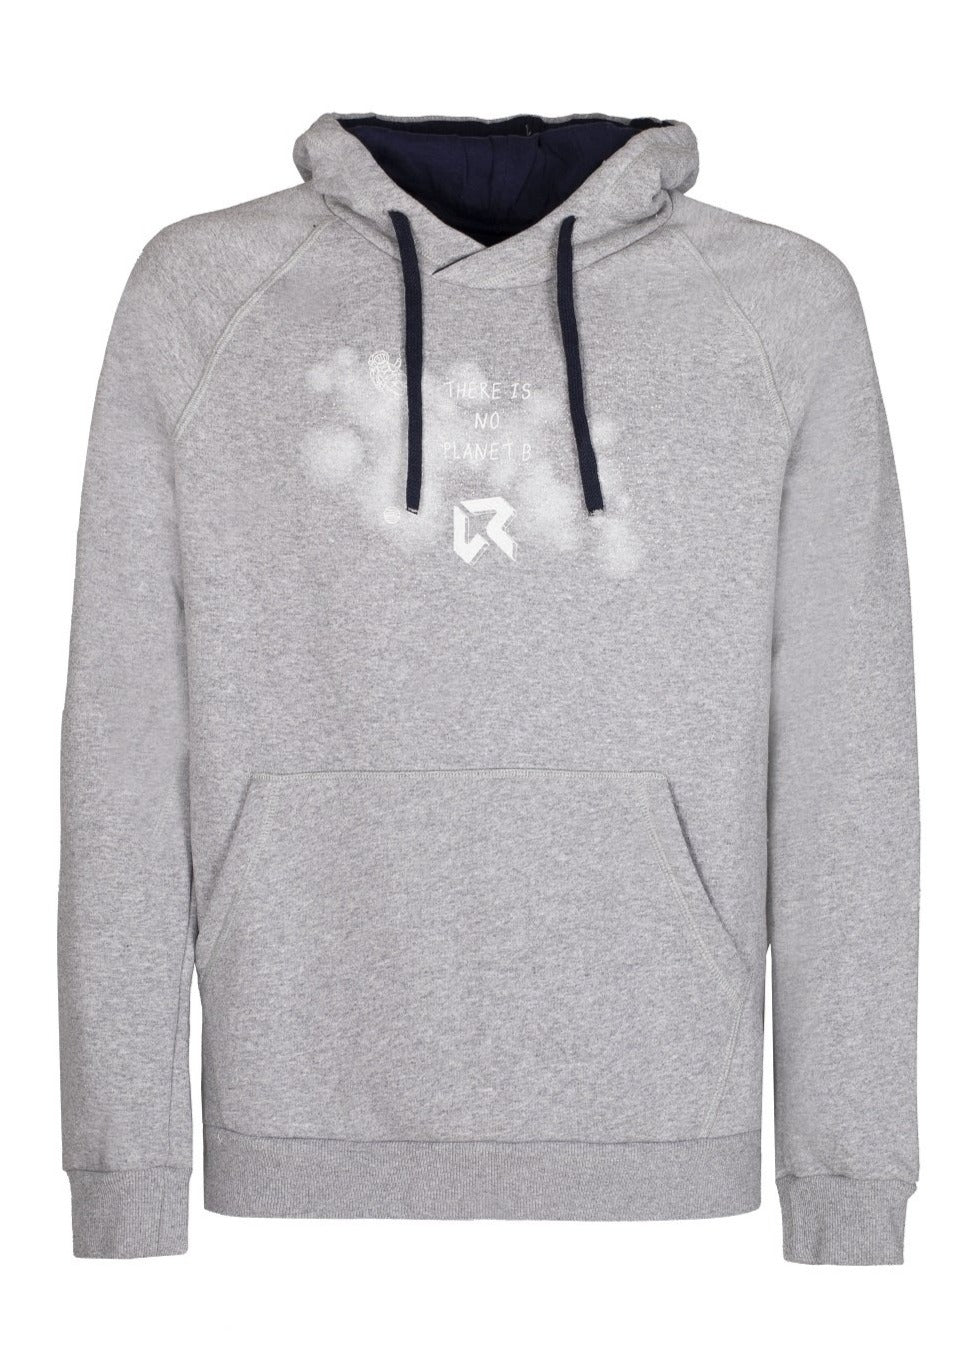 AMPLESSO COMPLESSO HOODIE MAN FLEECE